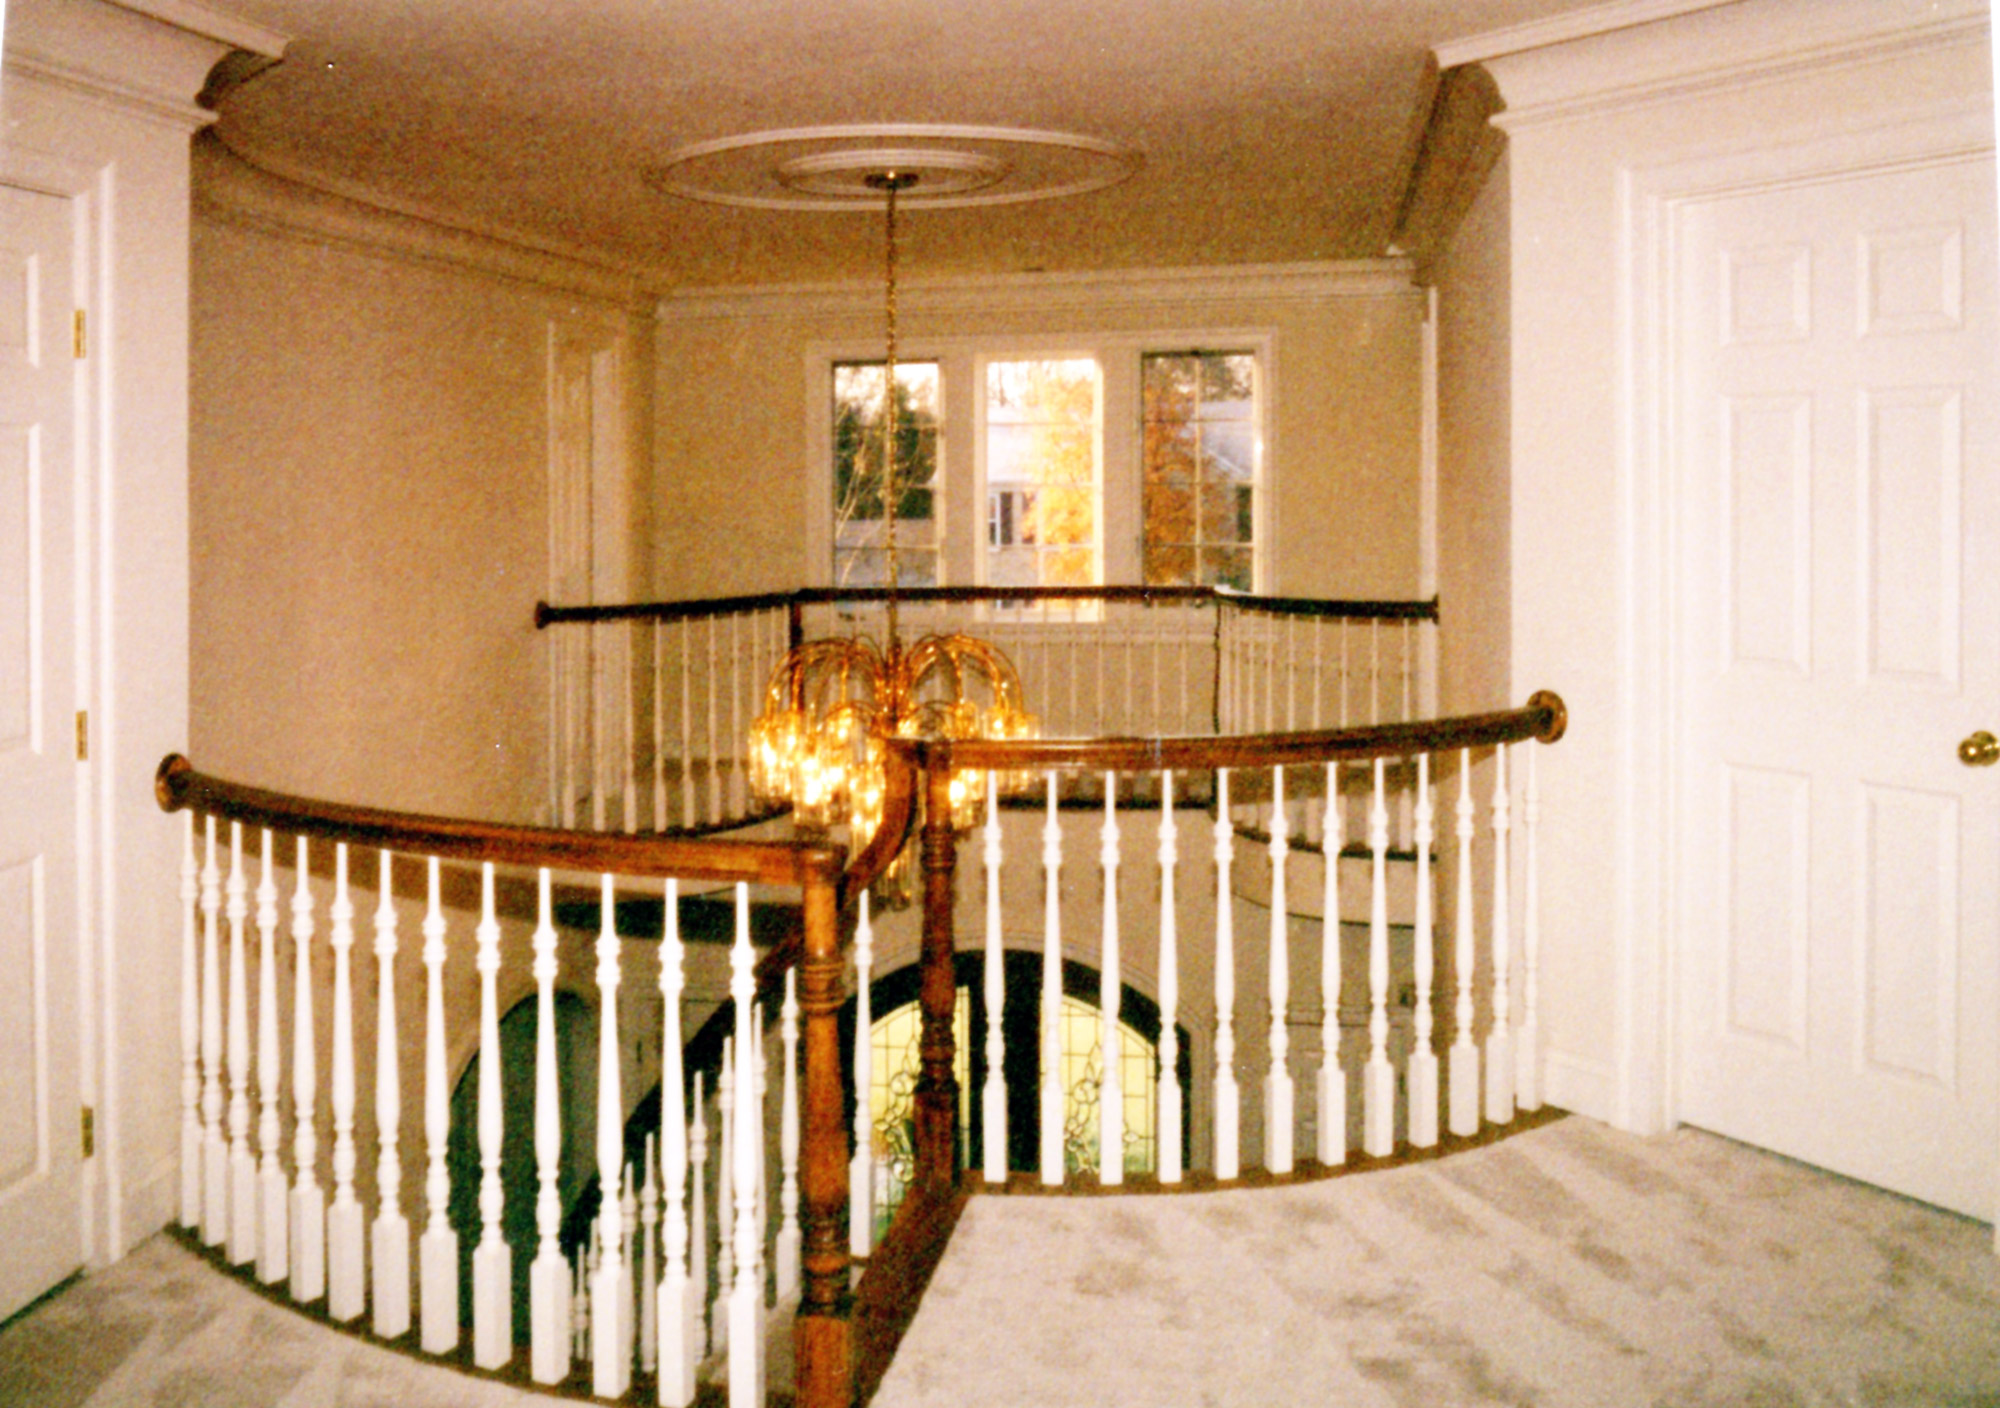 Photo from Upper Level Foyer towards Romeo and Juliet Balconies